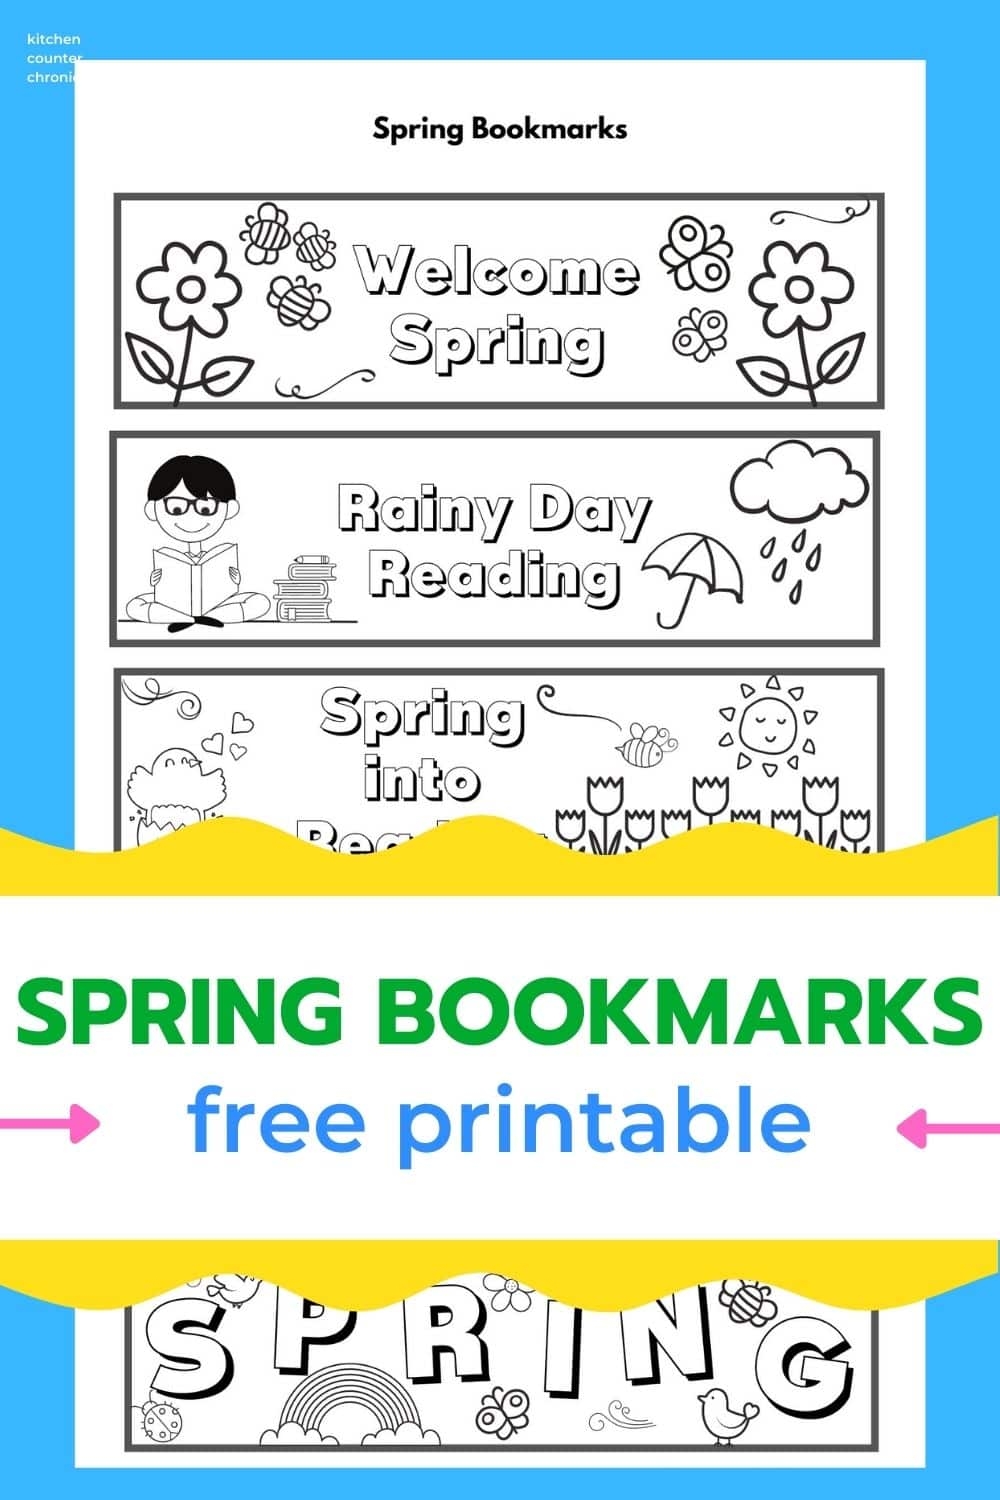 Printable Spring Bookmarks To Color